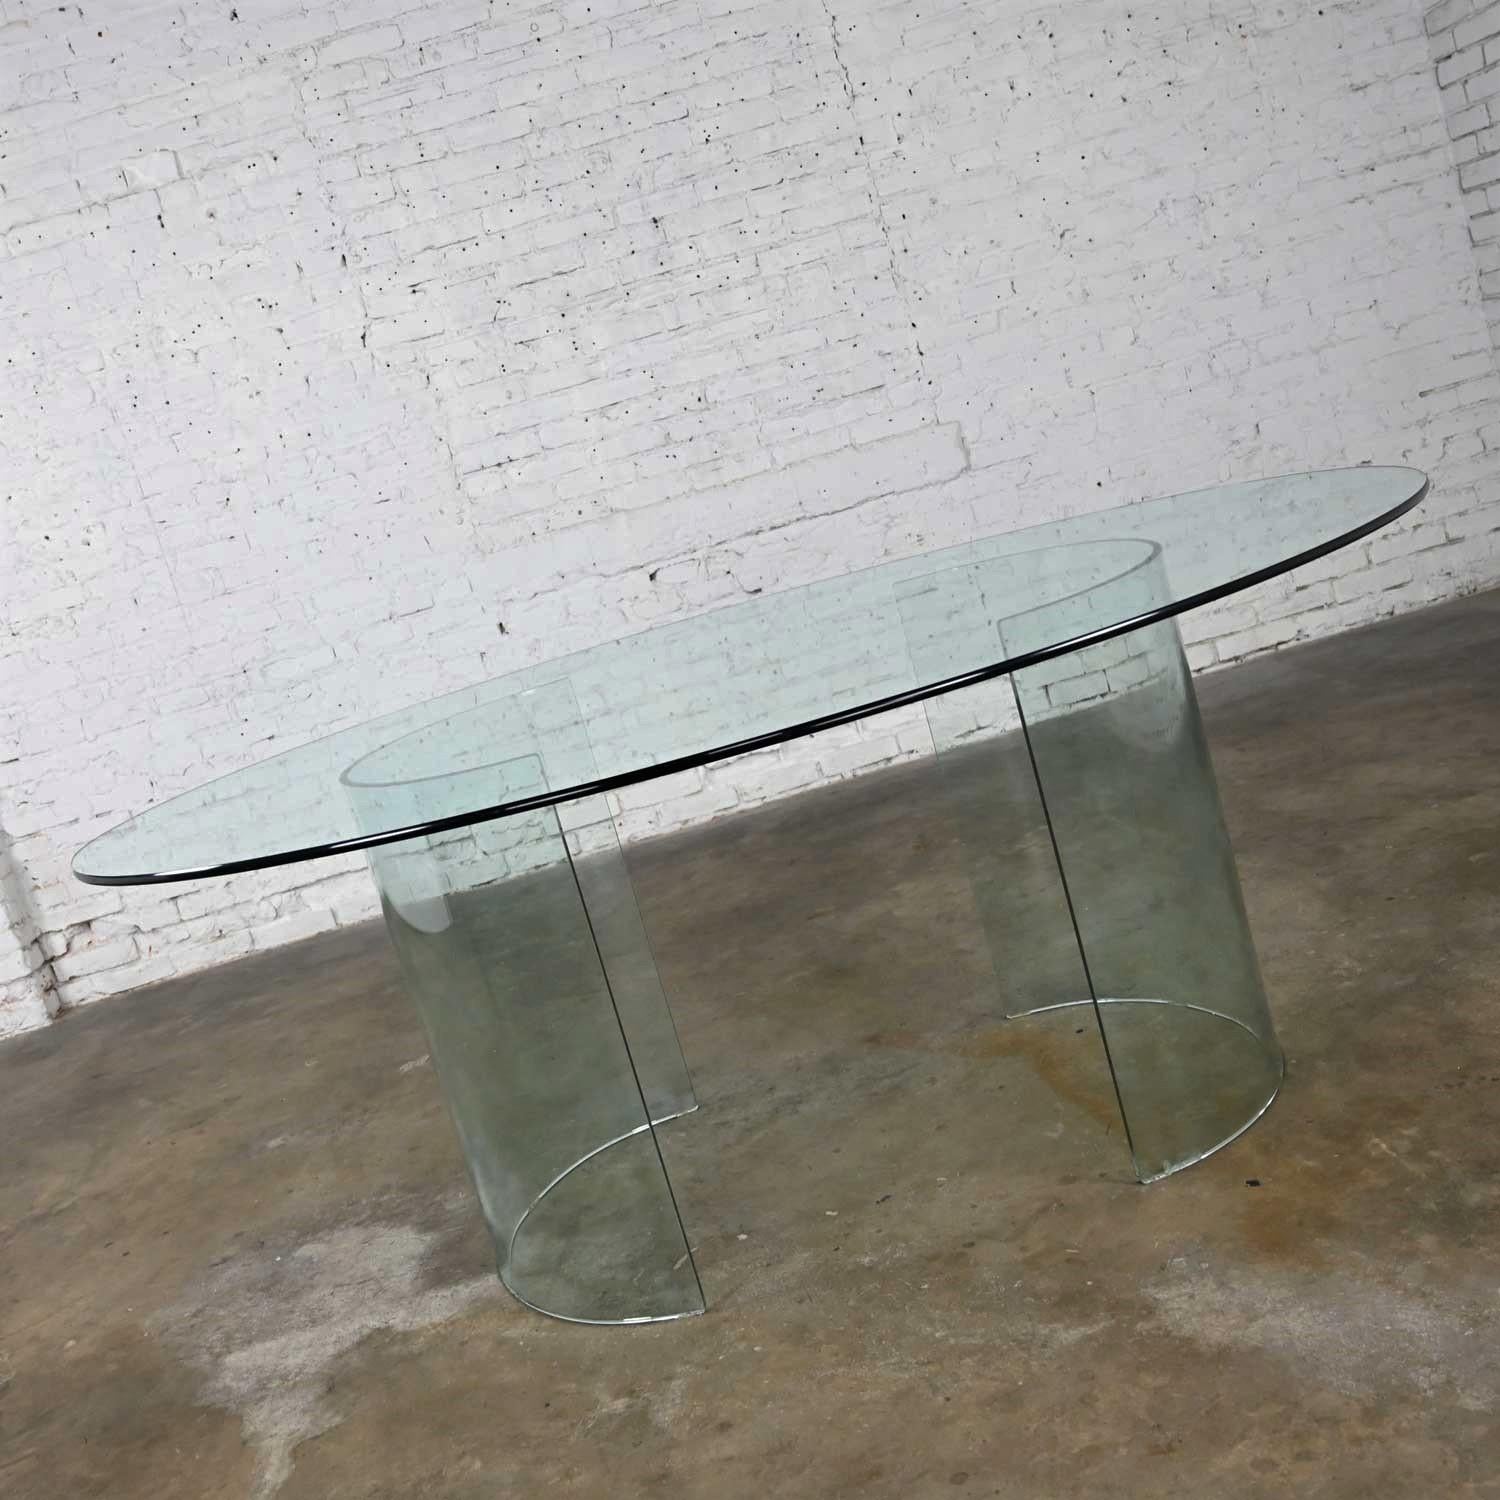 Stunning all glass modern dining table with dual (2) semi-circle pedestal bases and an elliptical shaped oval top. Beautiful condition, keeping in mind that this is vintage and not new so will have signs of use and wear. There is a chip on the